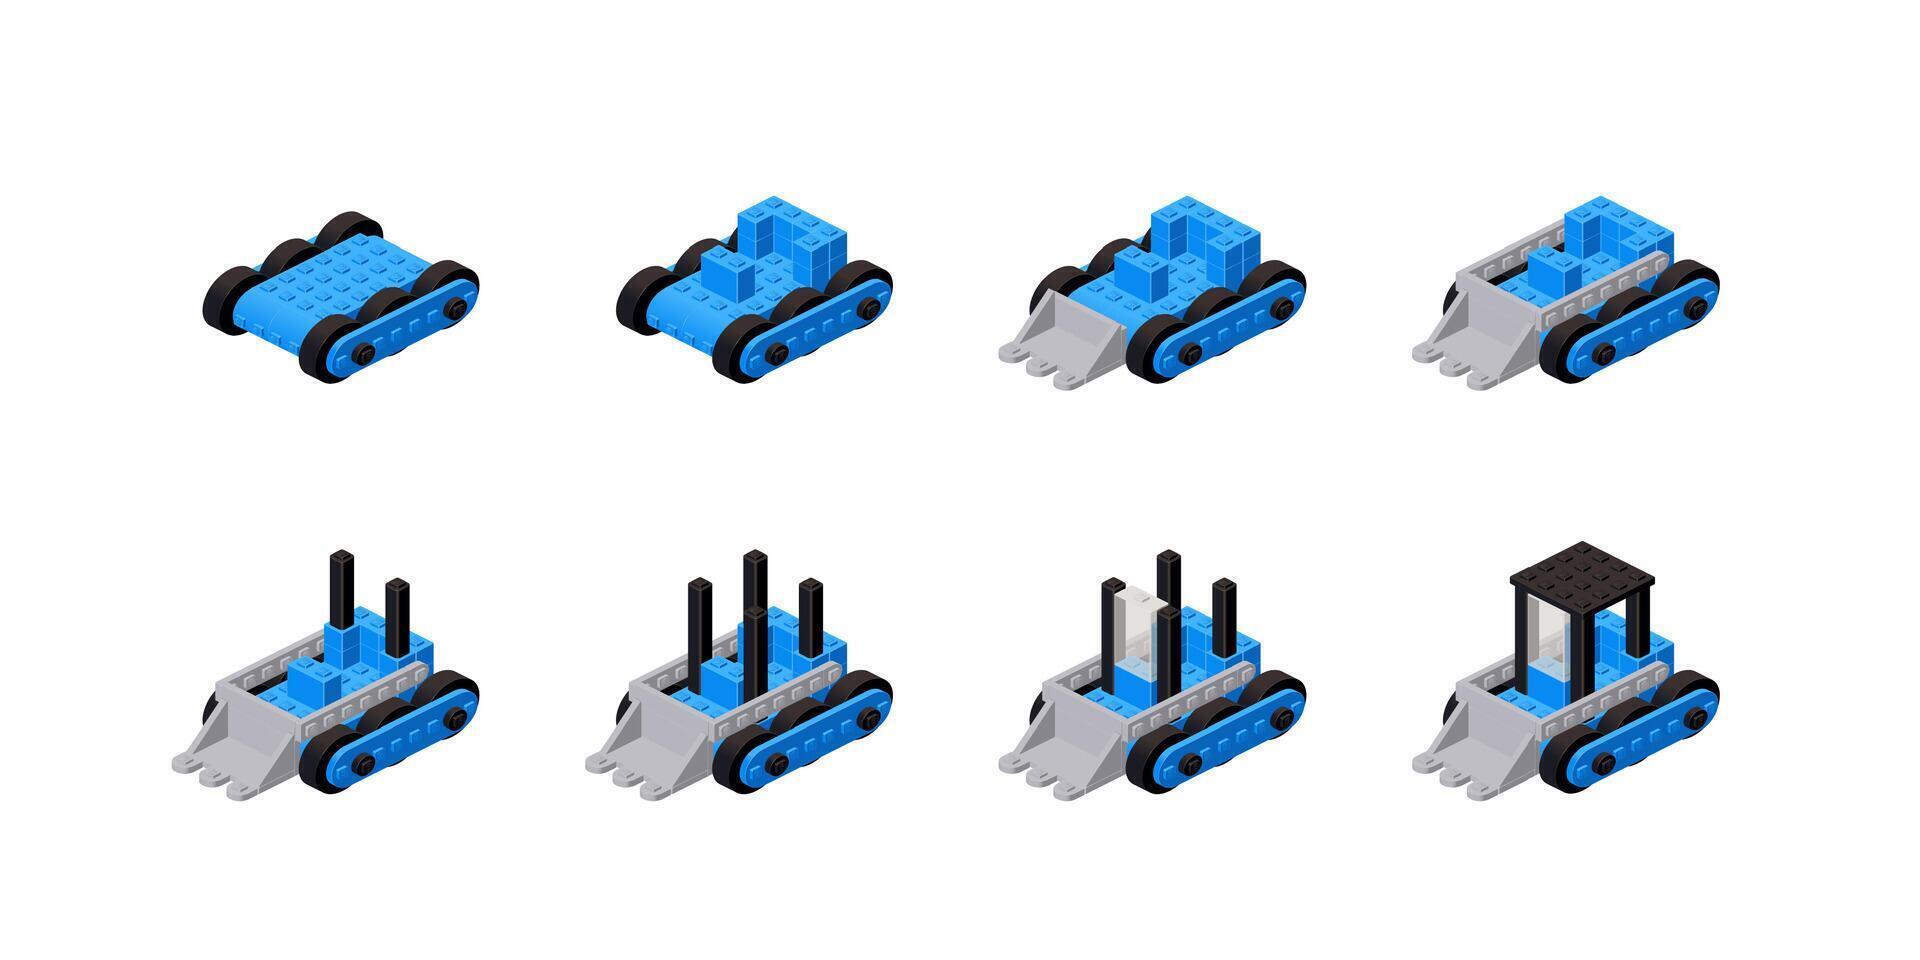 Step-by-step construction of a blue mini excavator from plastic blocks in isometry. Vector